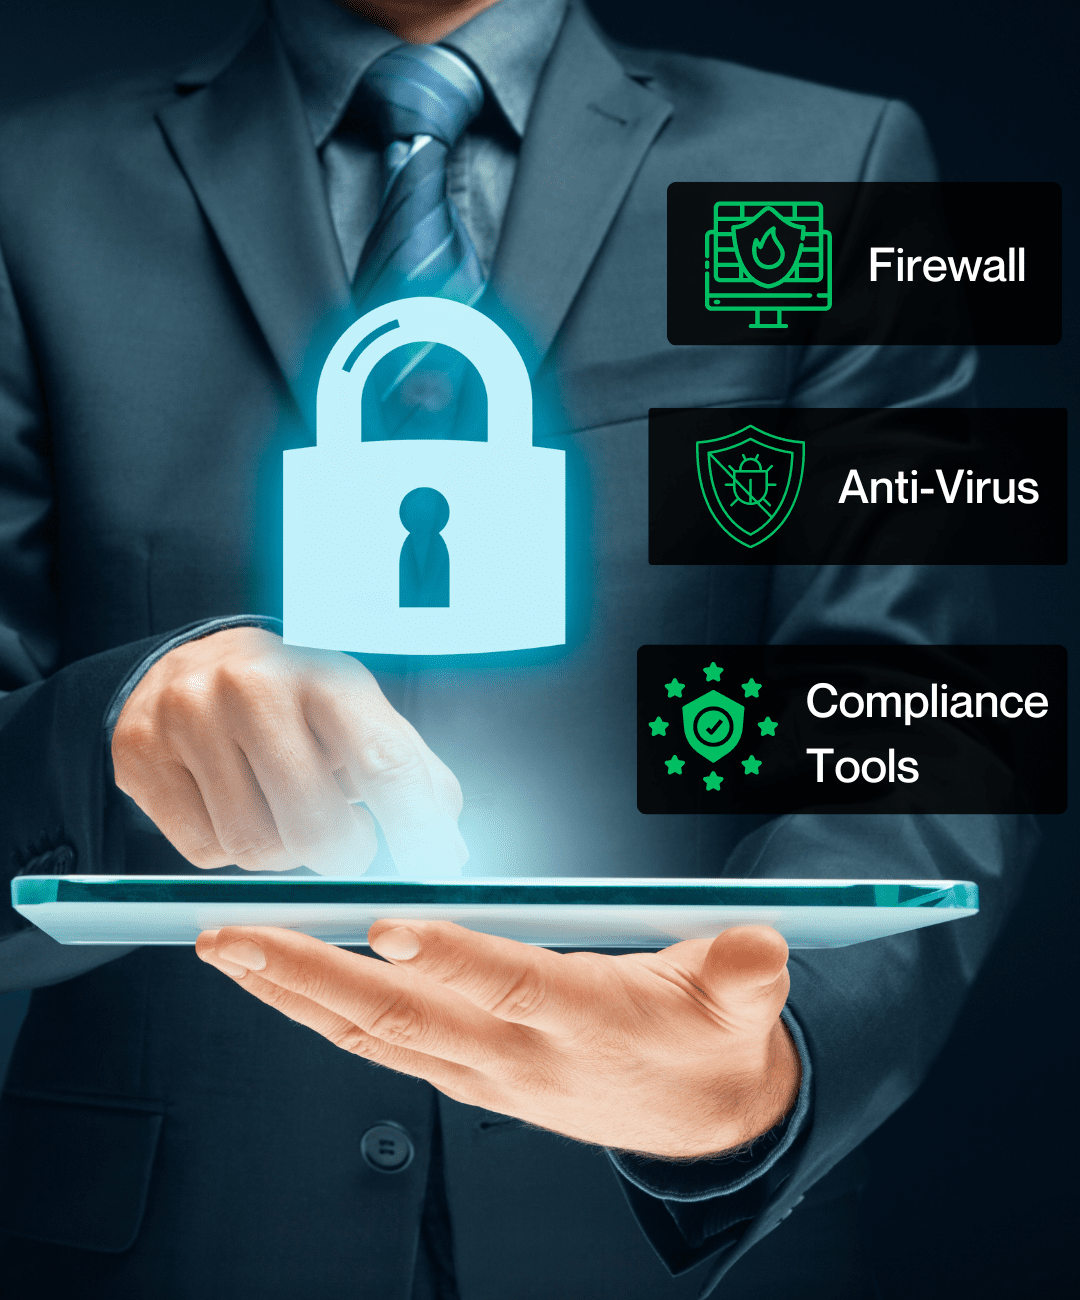 Collage of BDR’s Cybersecurity features including firewall, anti-virus, and compliance tools, highlighting the comprehensive protection offered.